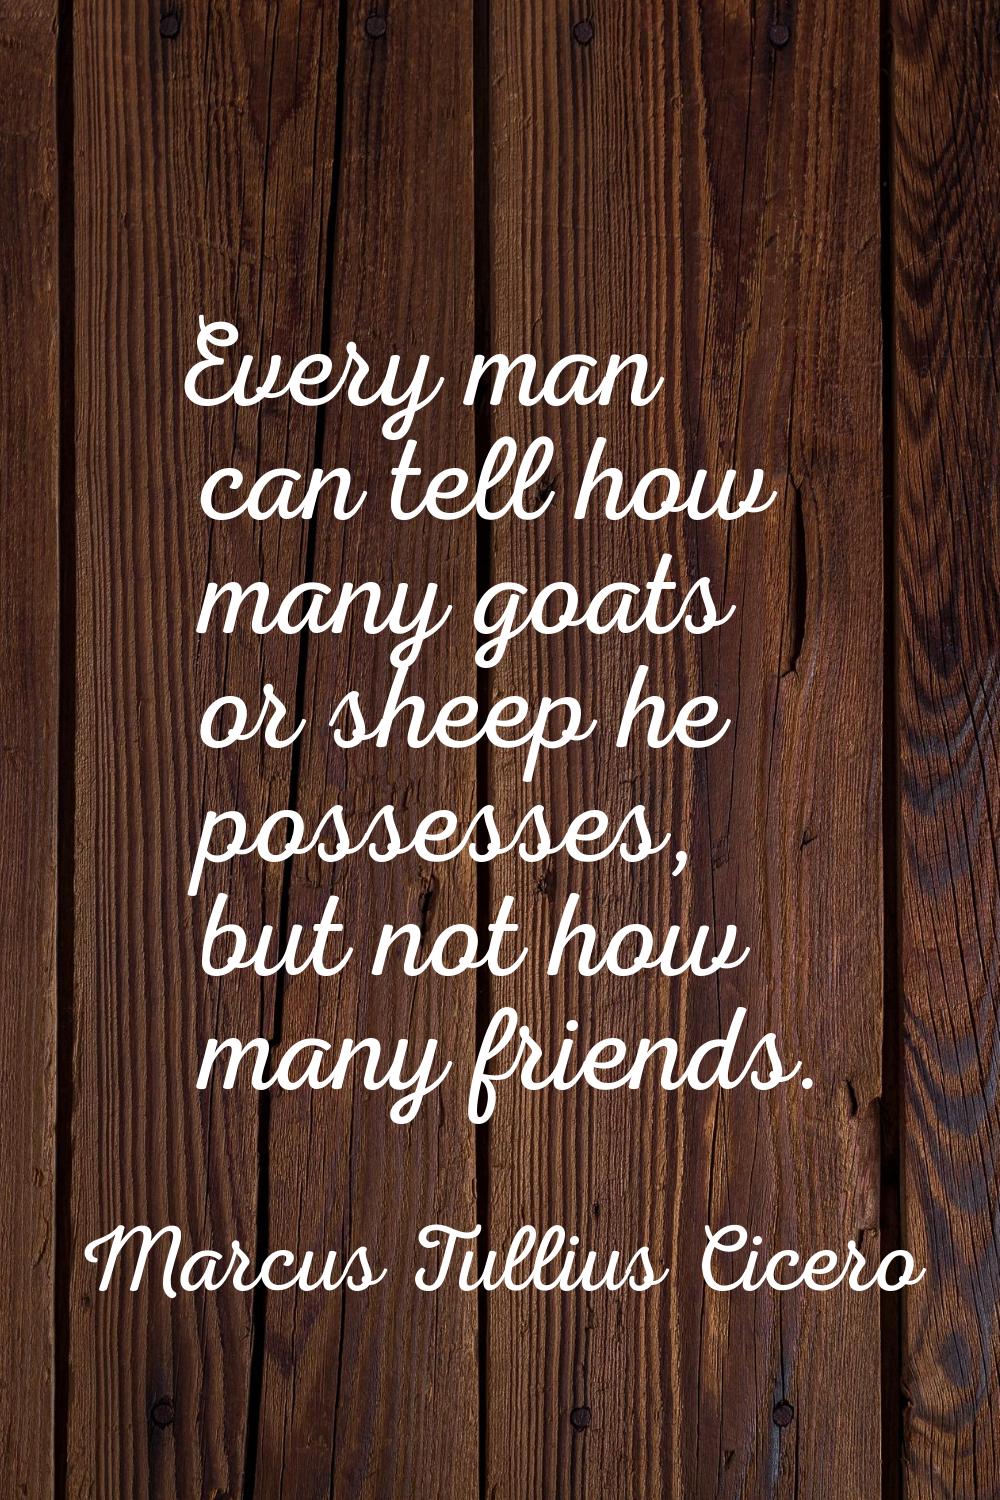 Every man can tell how many goats or sheep he possesses, but not how many friends.